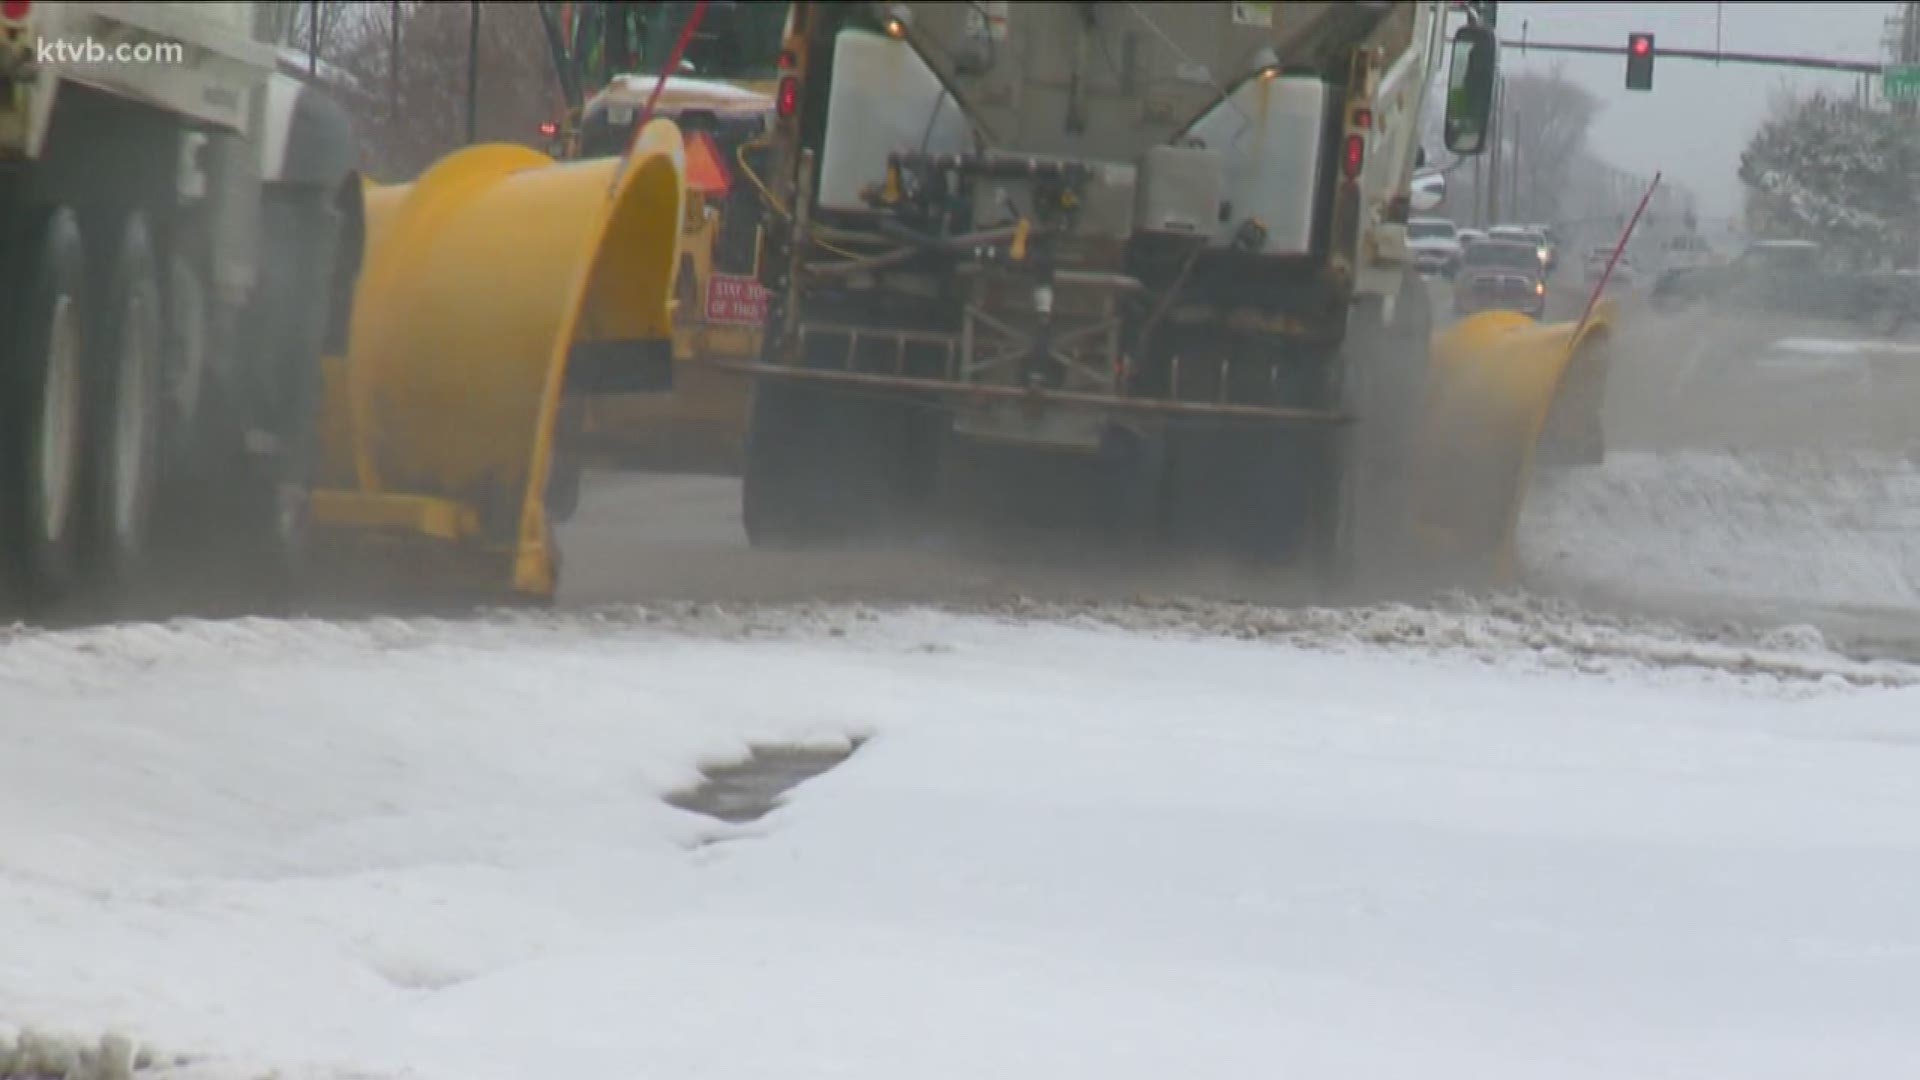 Local agencies are gearing up for the first big snow storm of the season.